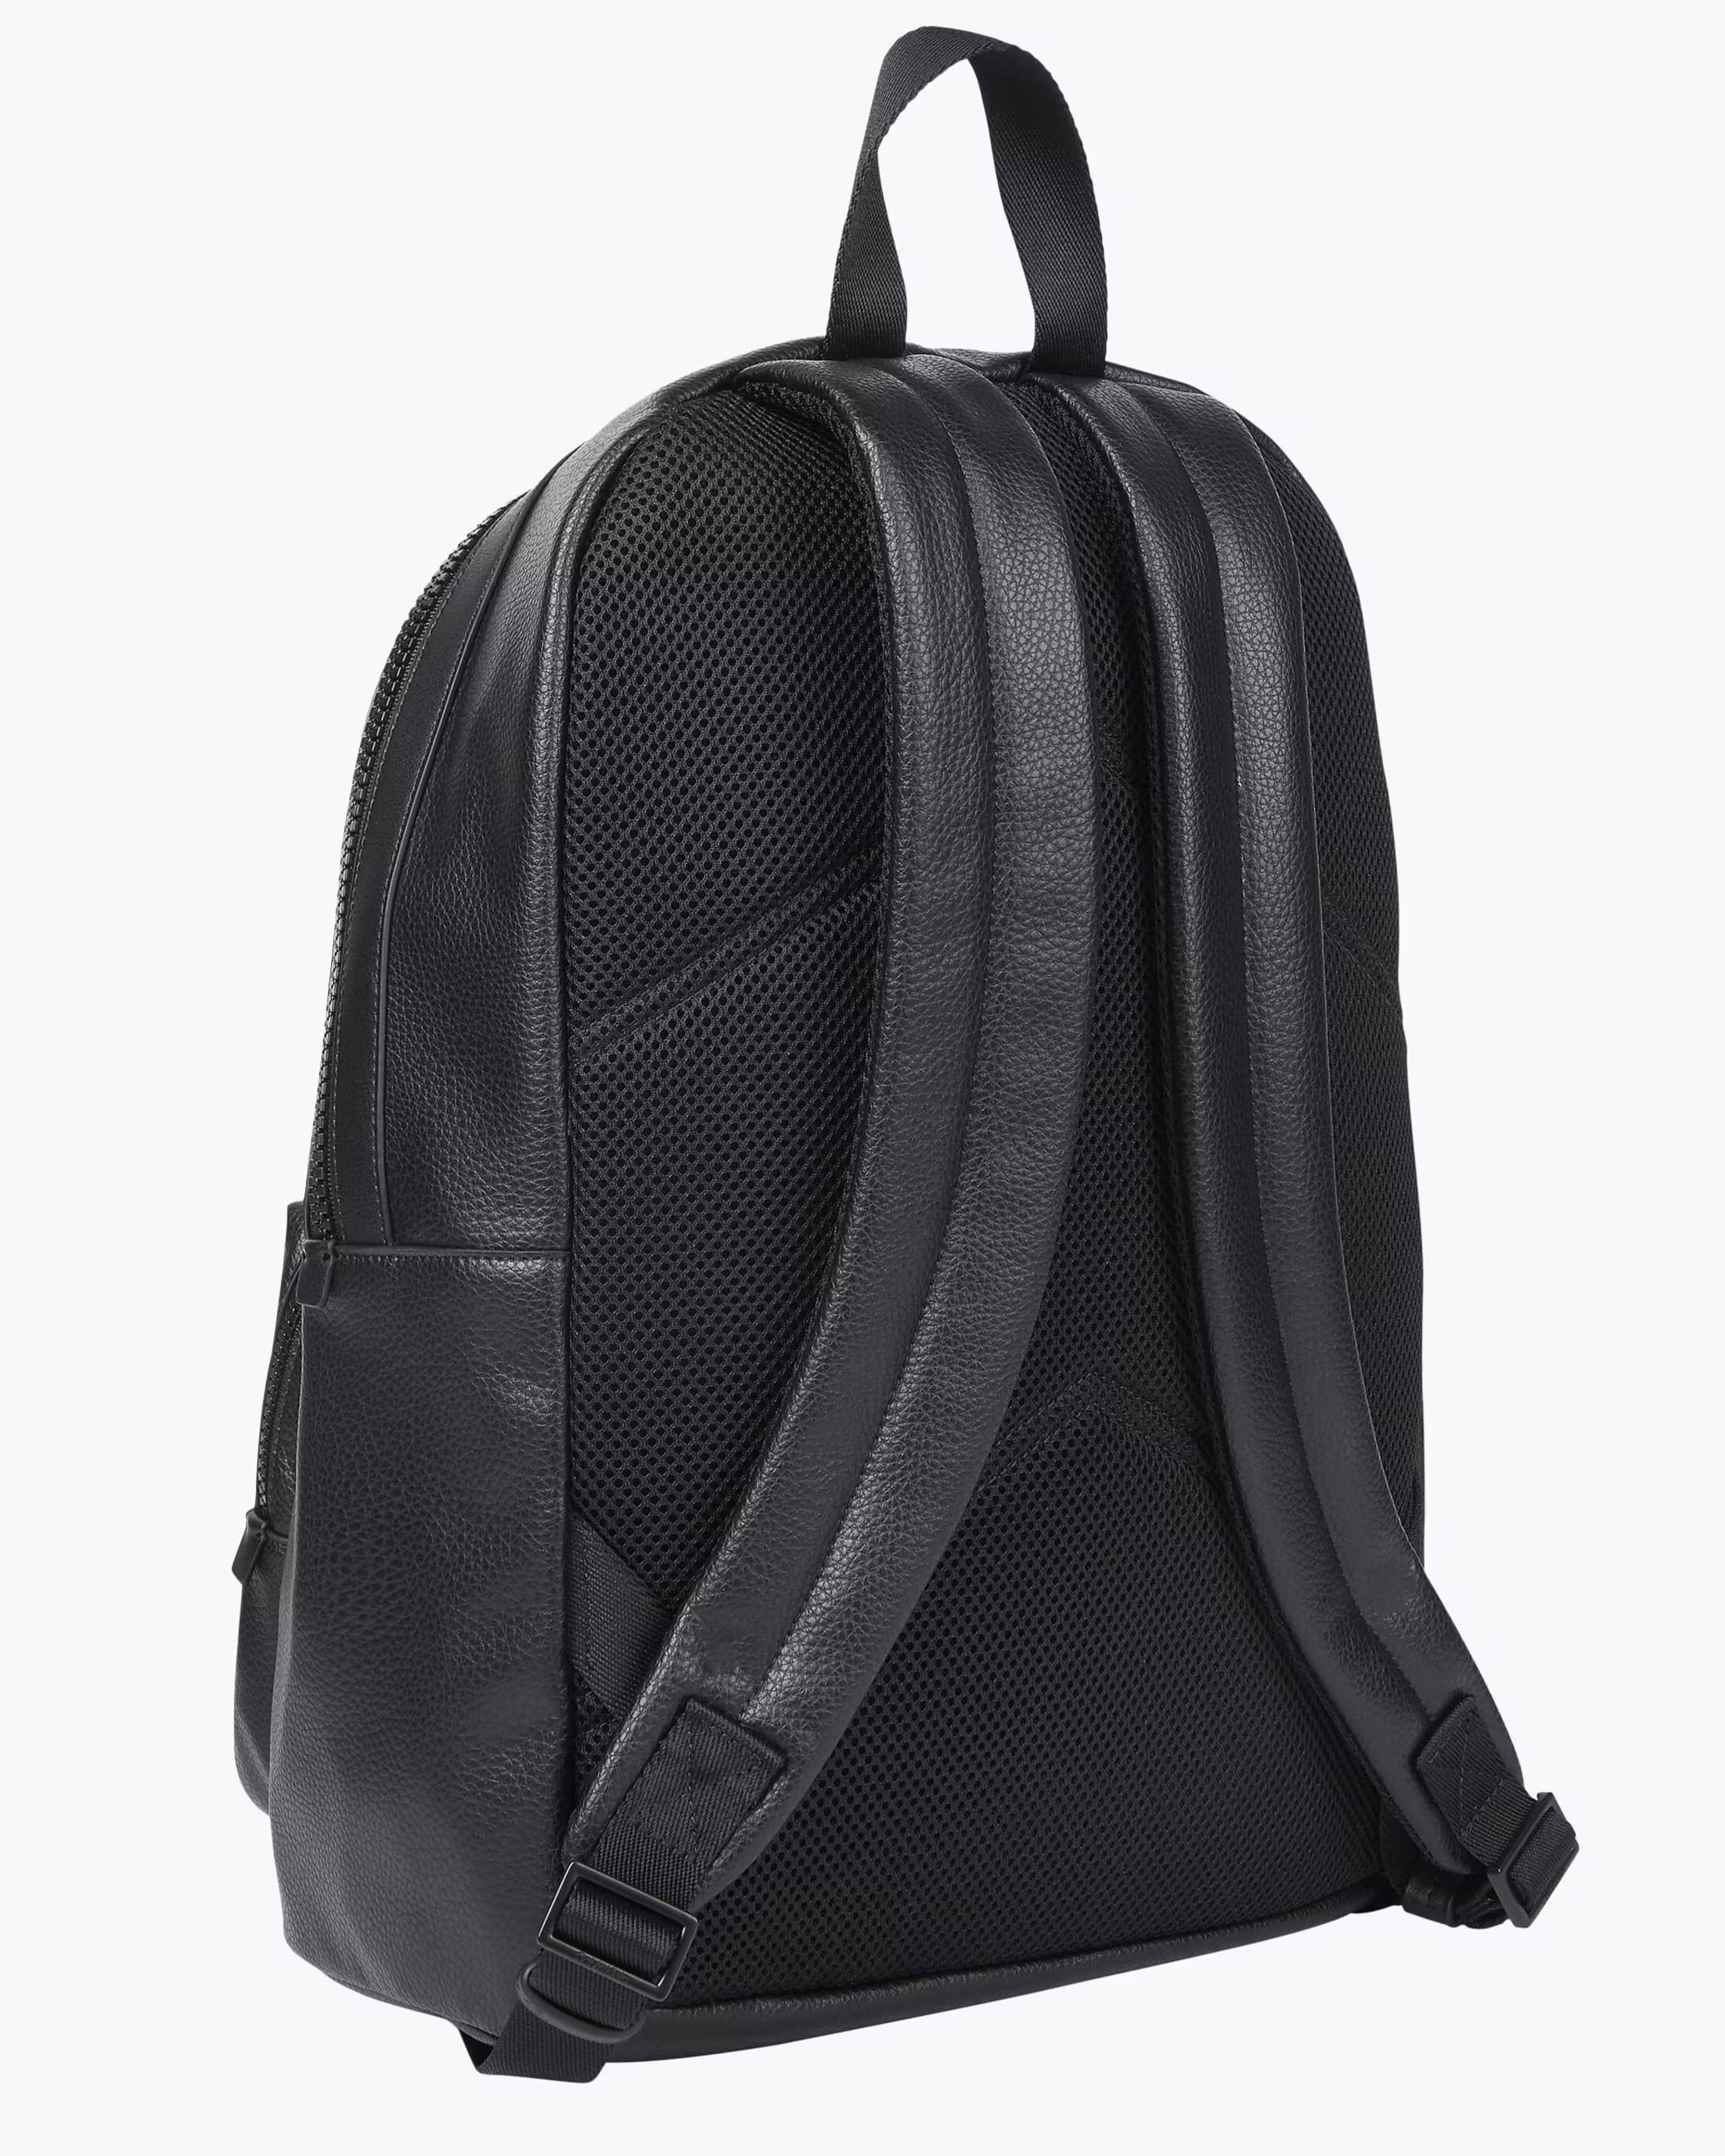 BALO CK CALVIN KLEIN CAMPUS FAUX LEATHER BACKPACK K50K508696 6